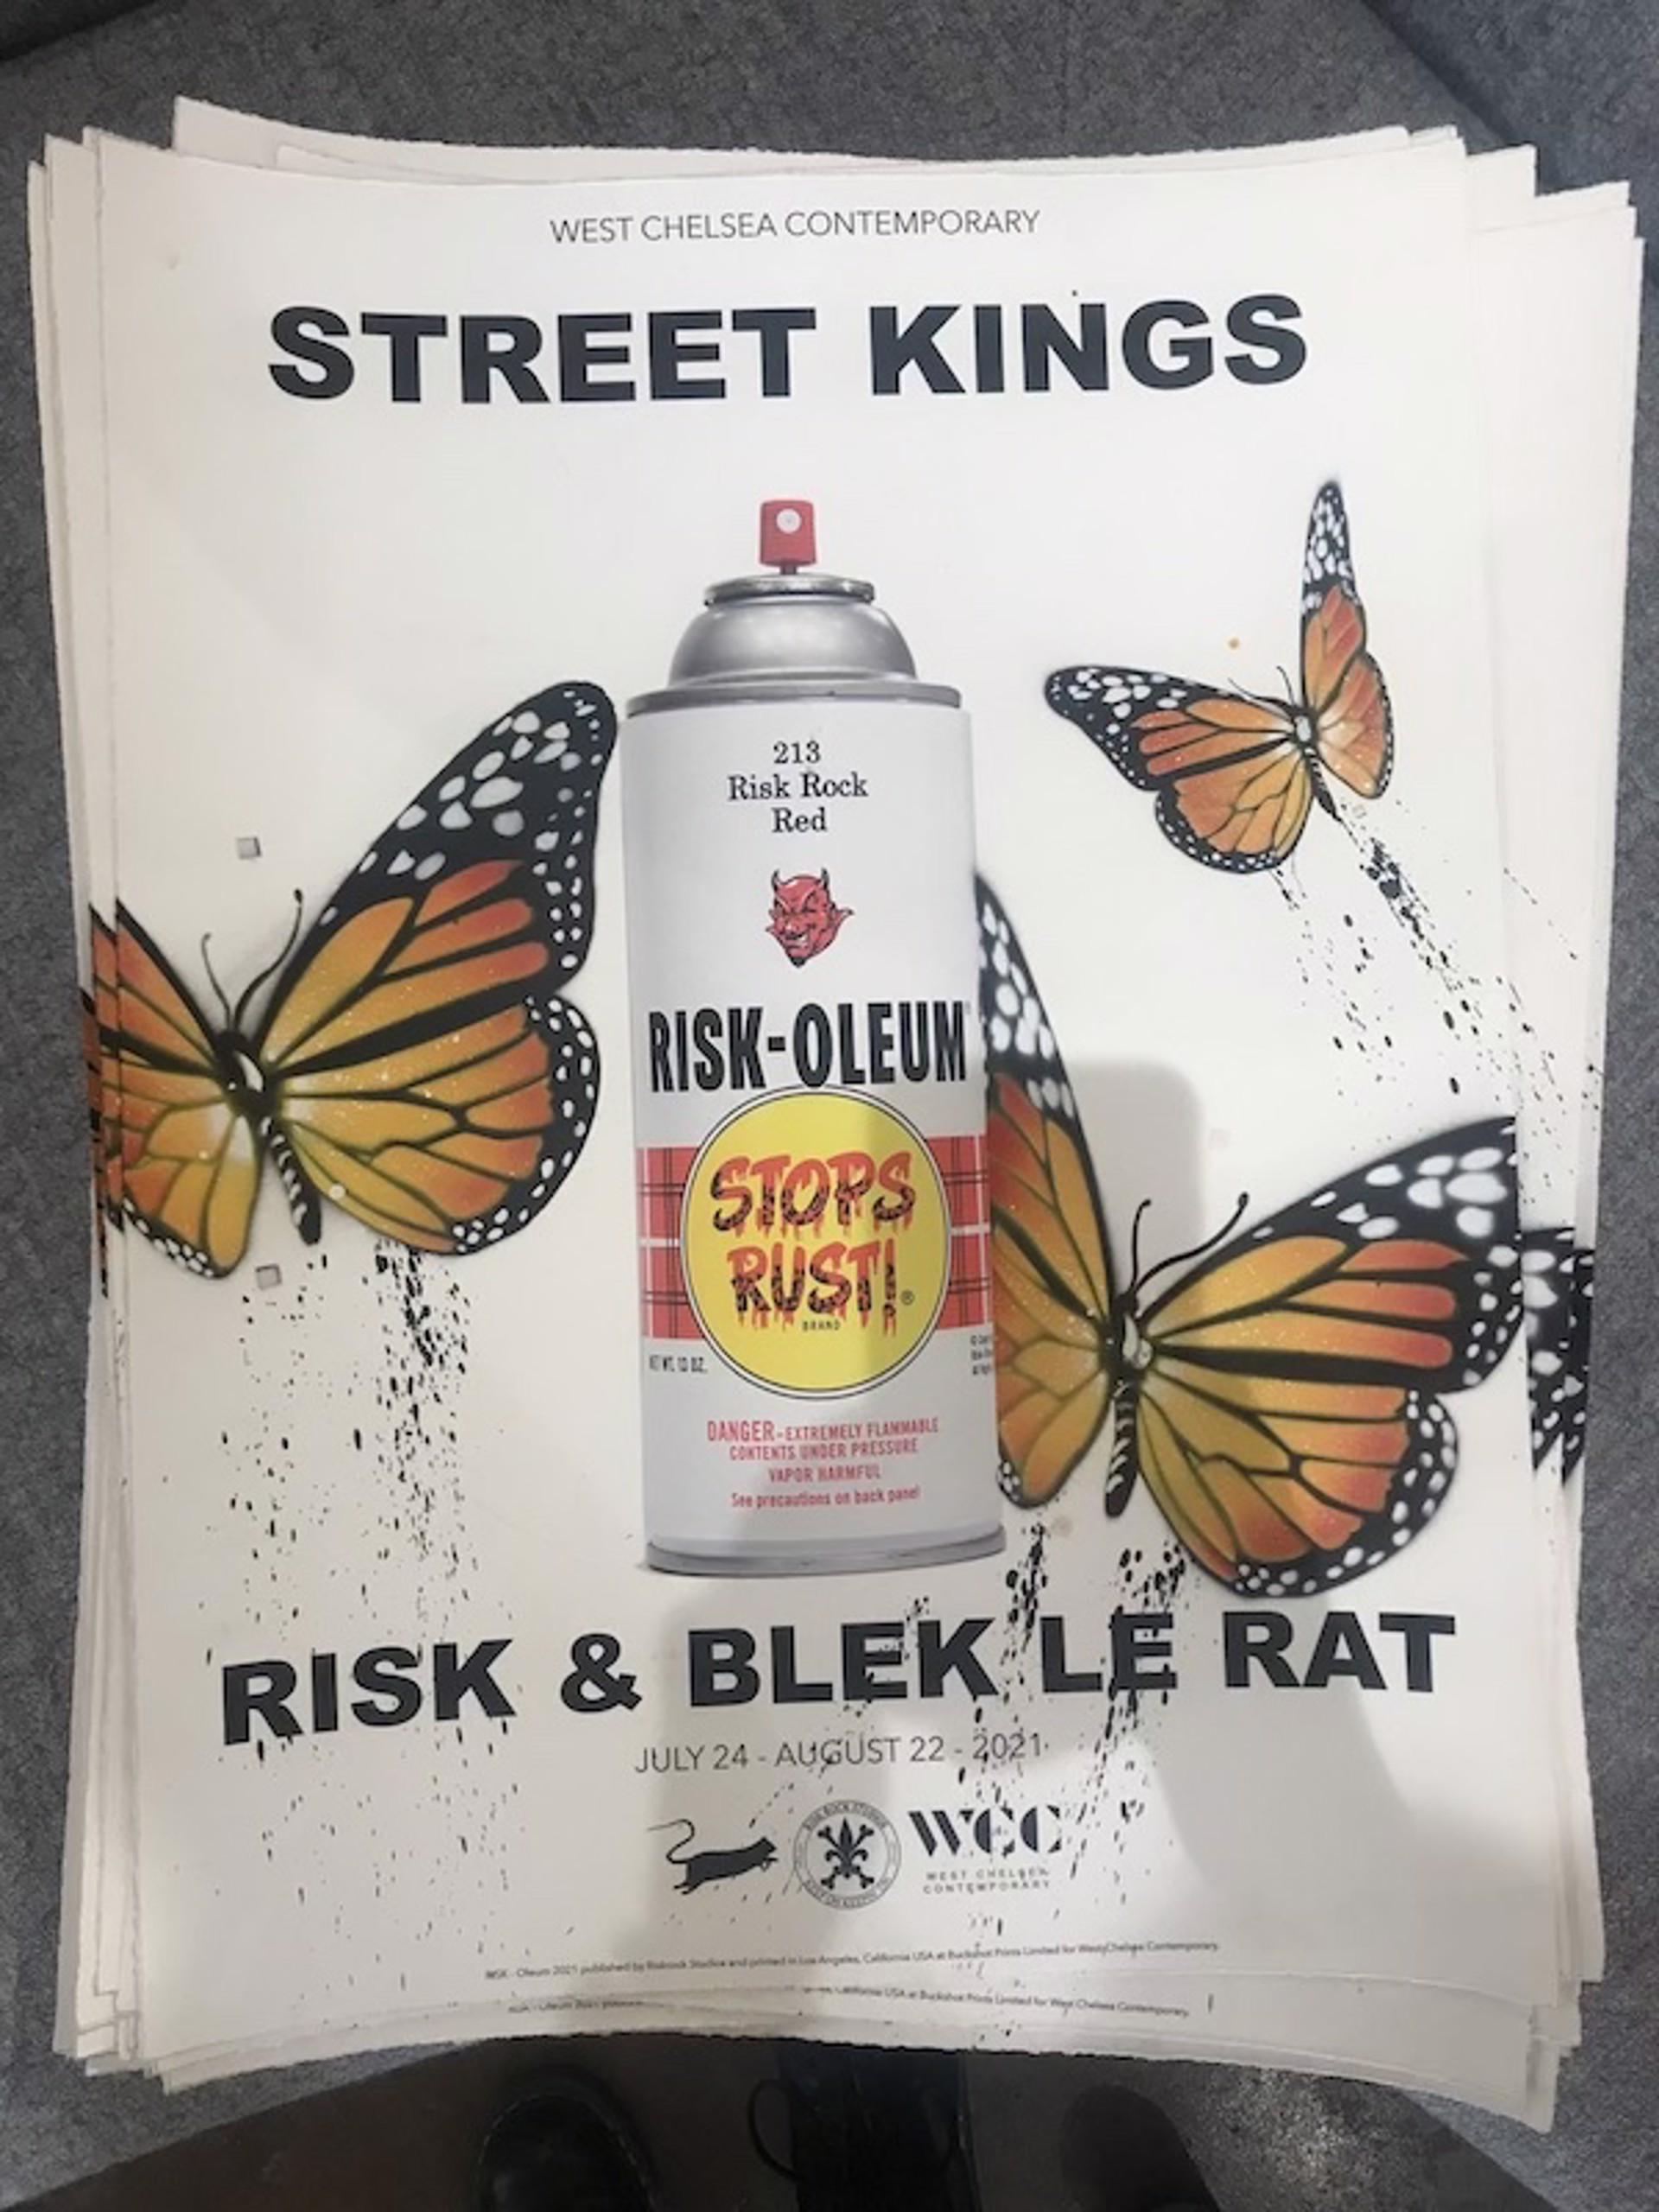 Street Kings Show Print (47/50) by Risk